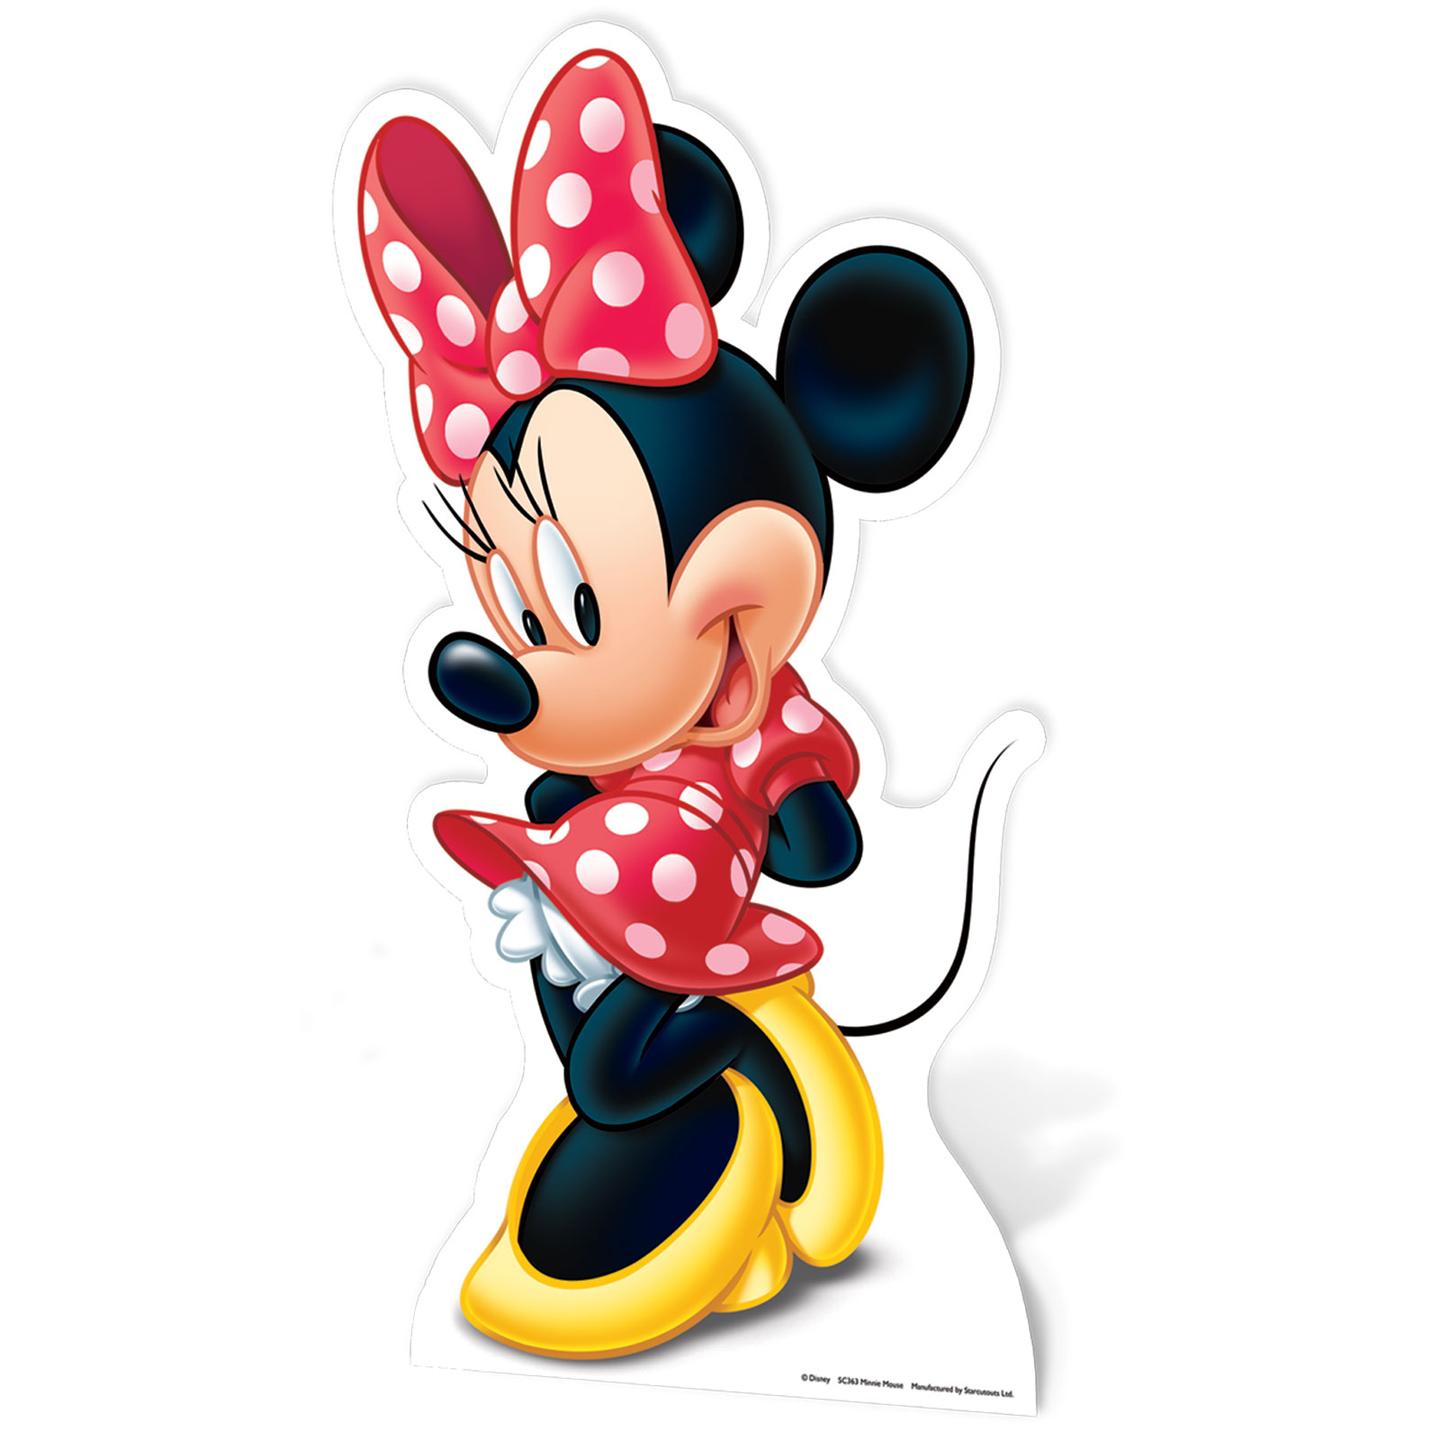 Minnie Mouse Large Cardboard Cut Out New 100 Official | eBay